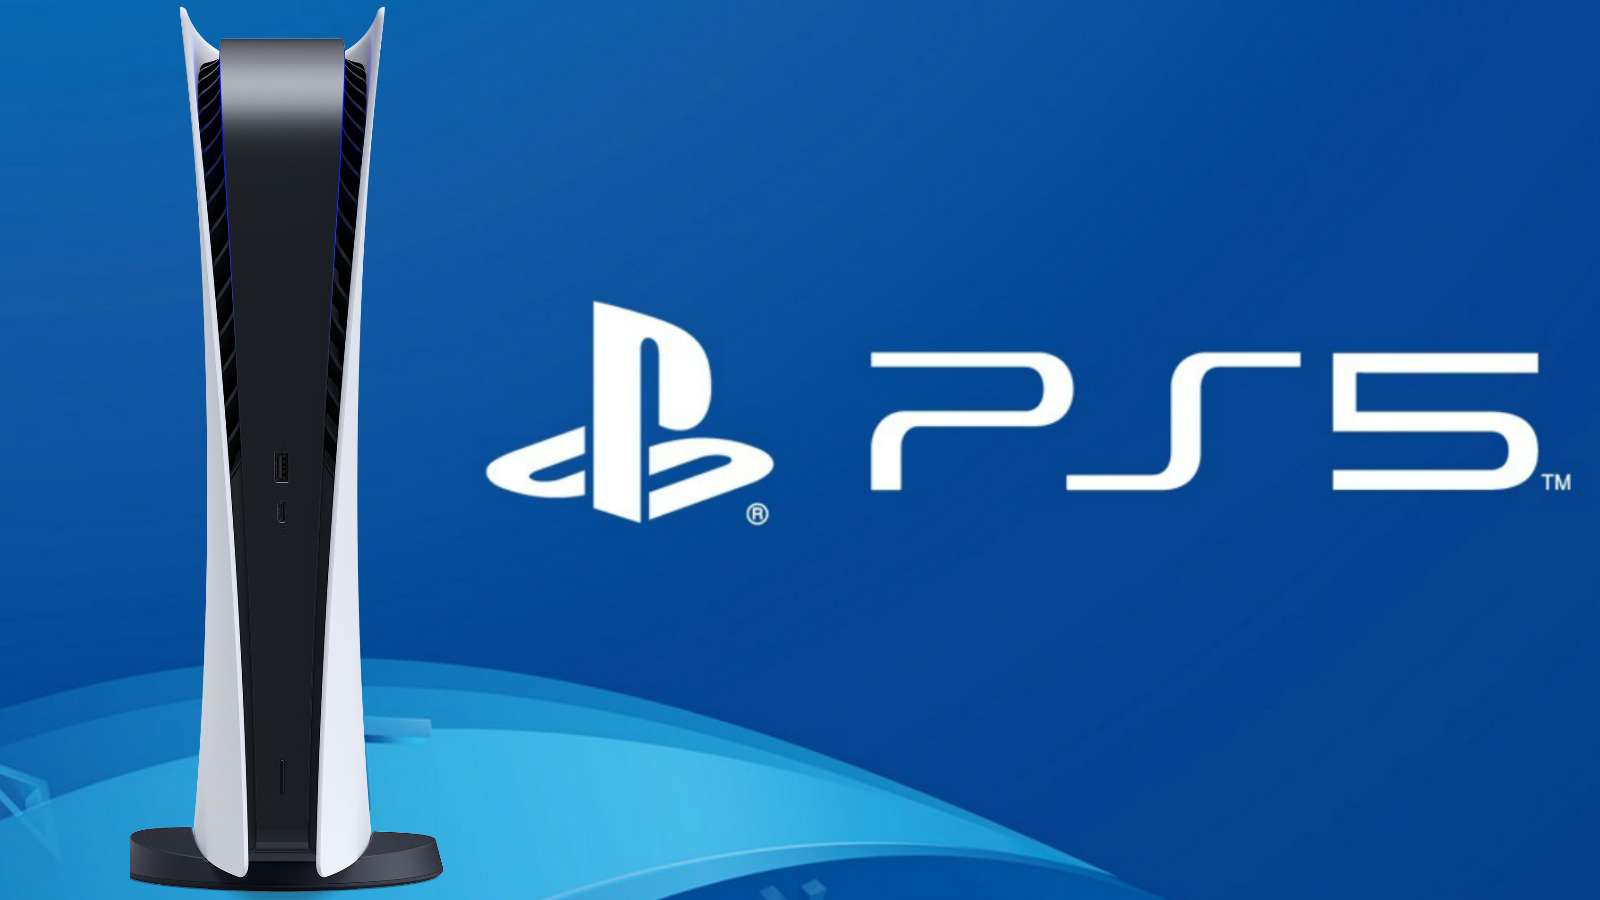 PS5 Logo and Console